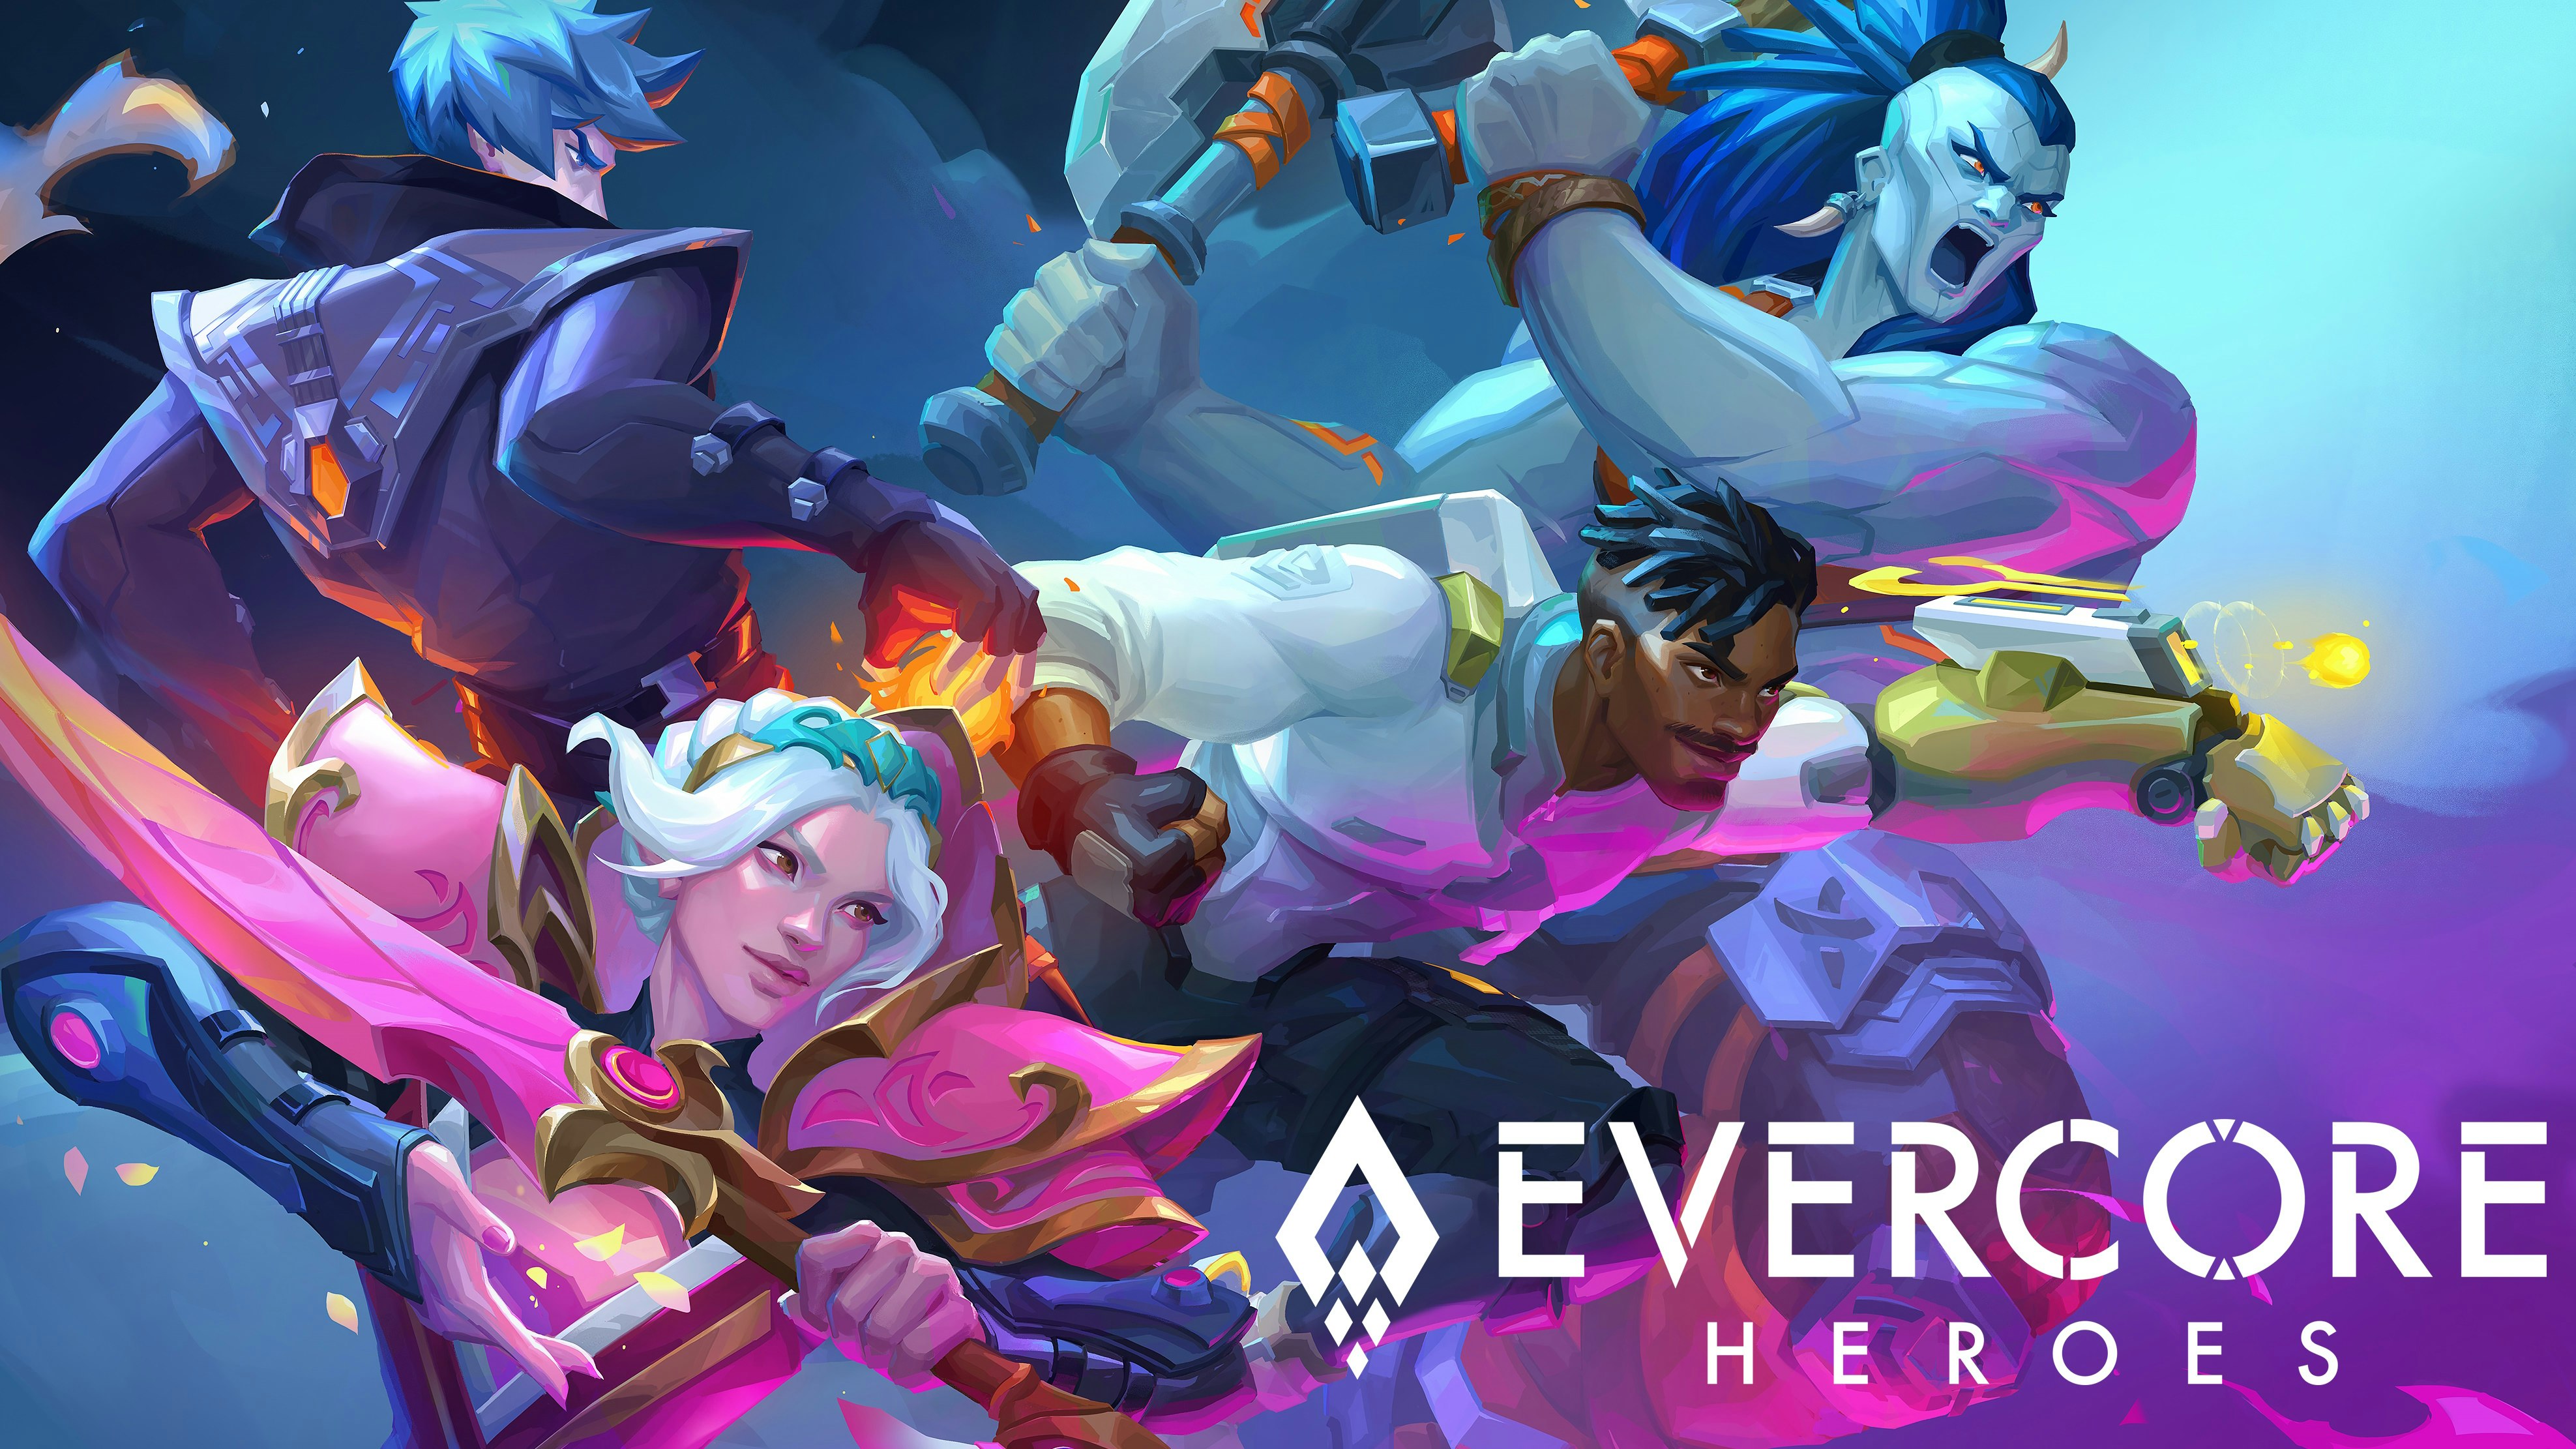 An important update about Evercore Heroes